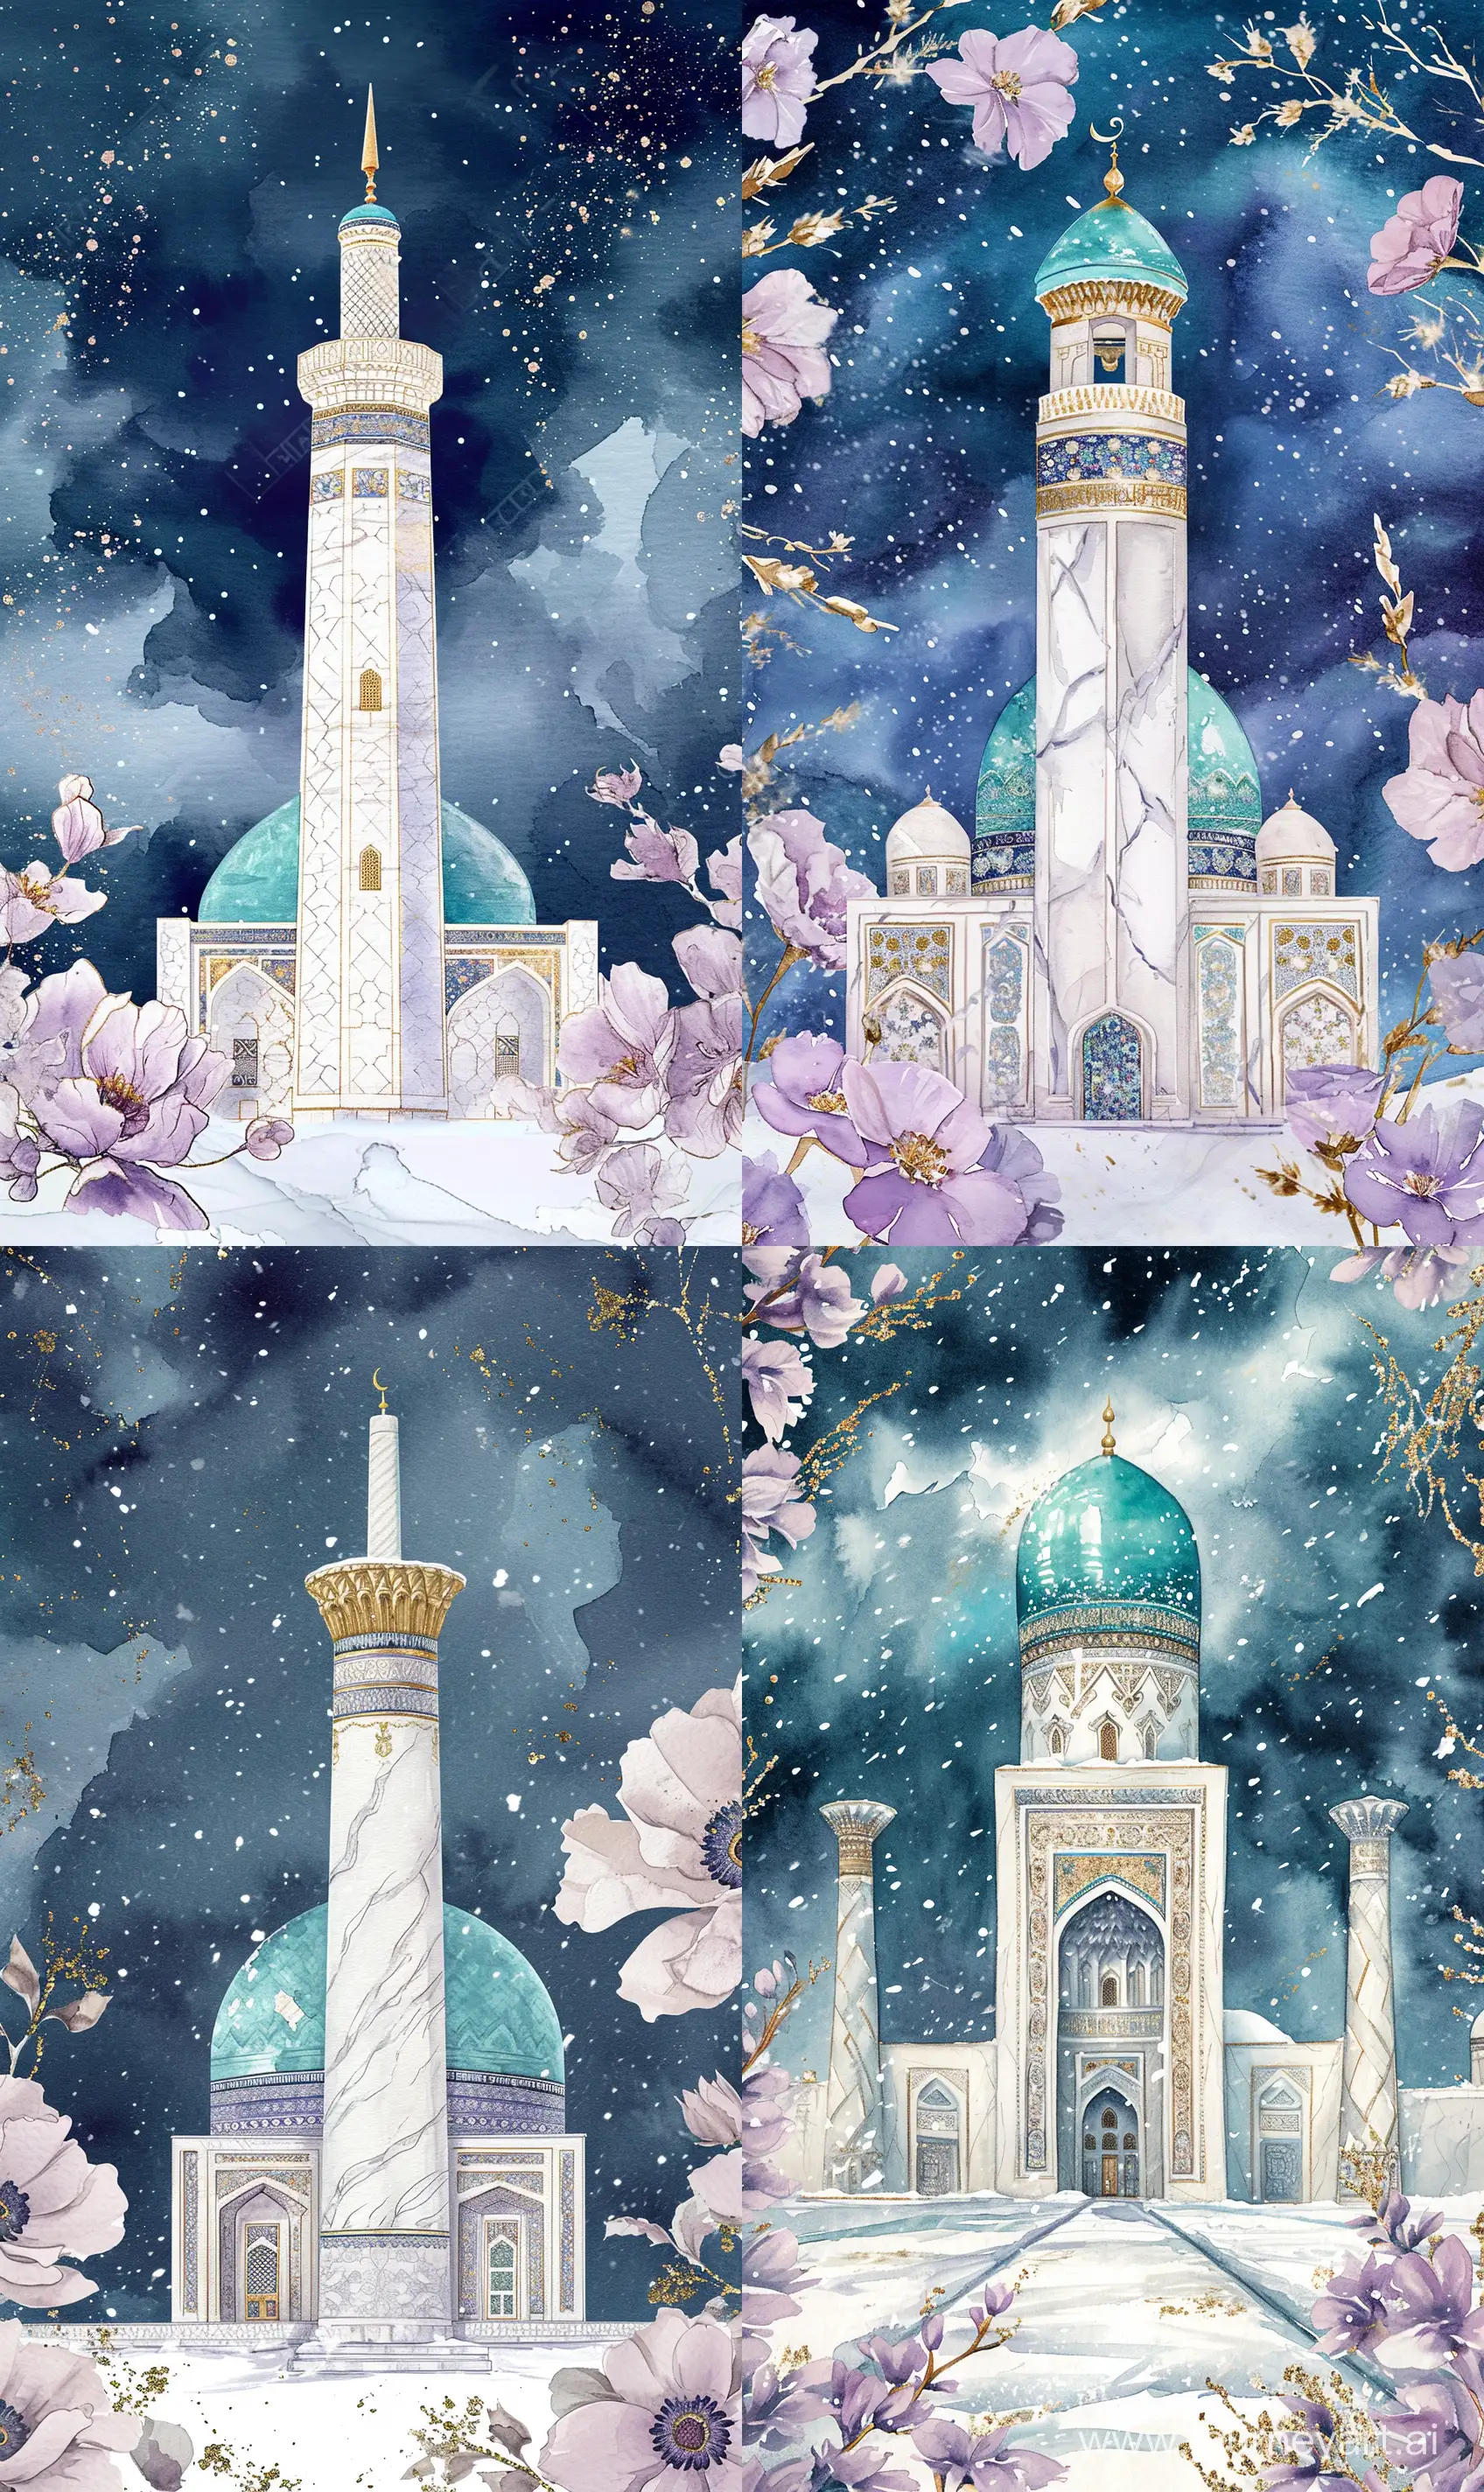 Uzbekistan-Mosque-Greeting-Card-Snowfall-Serenity-with-Turquoise-Dome-and-Persian-Tiles